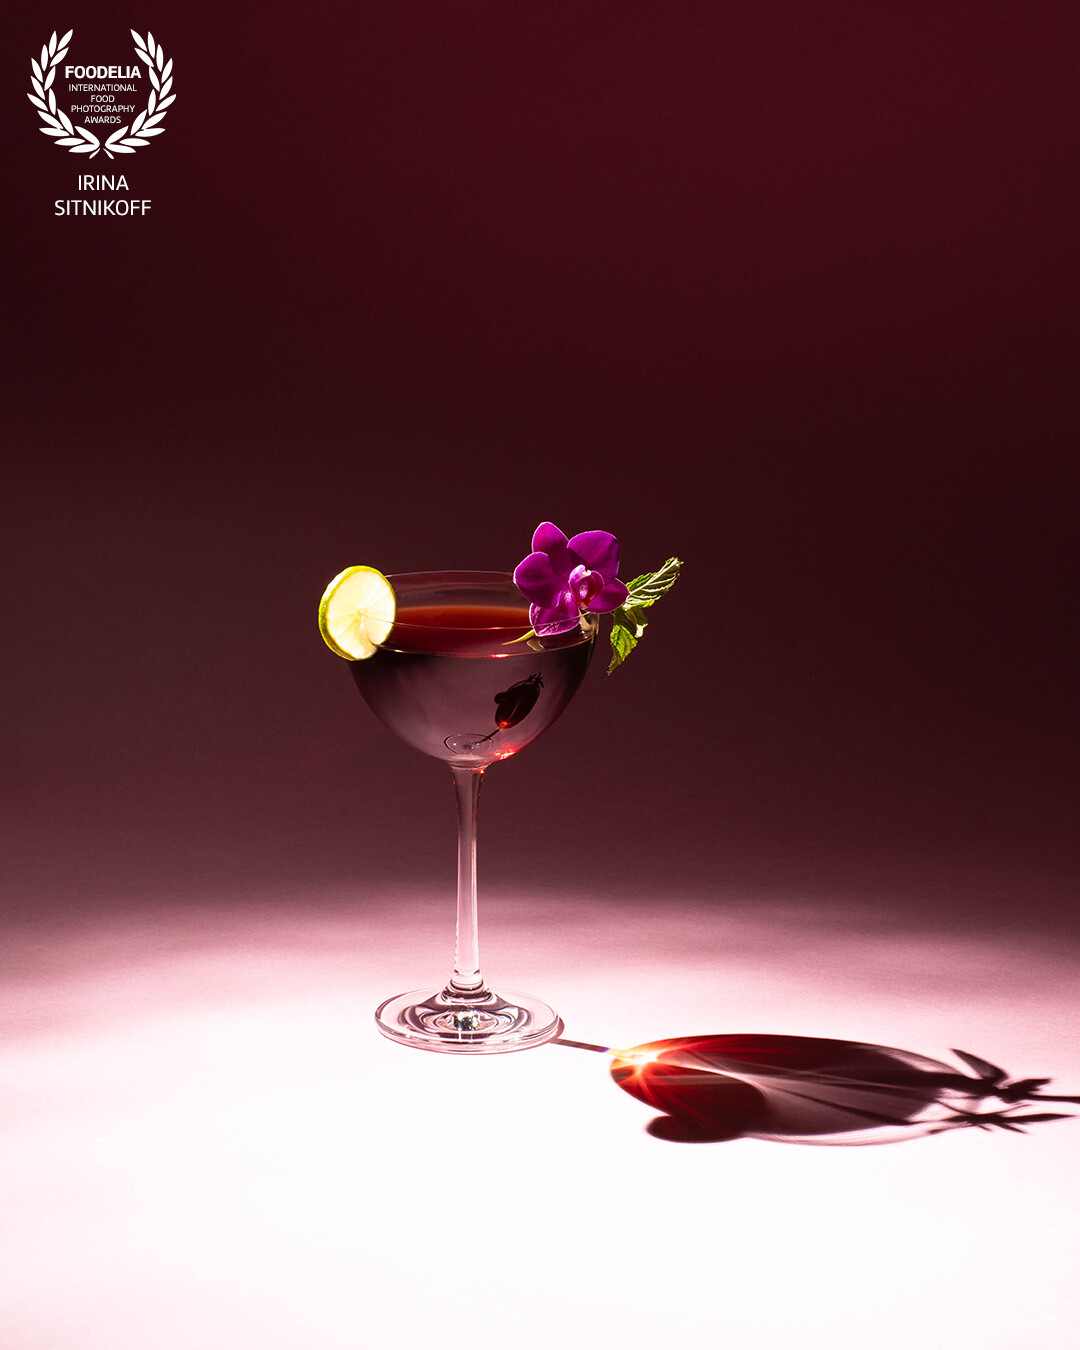 This is another photo that was inspired by my Le Cordon Bleu Food Photography mentor & teacher Nelly Le Comte. I experimented with light and color and came up with this beautiful burgundy colored theme & shadow.